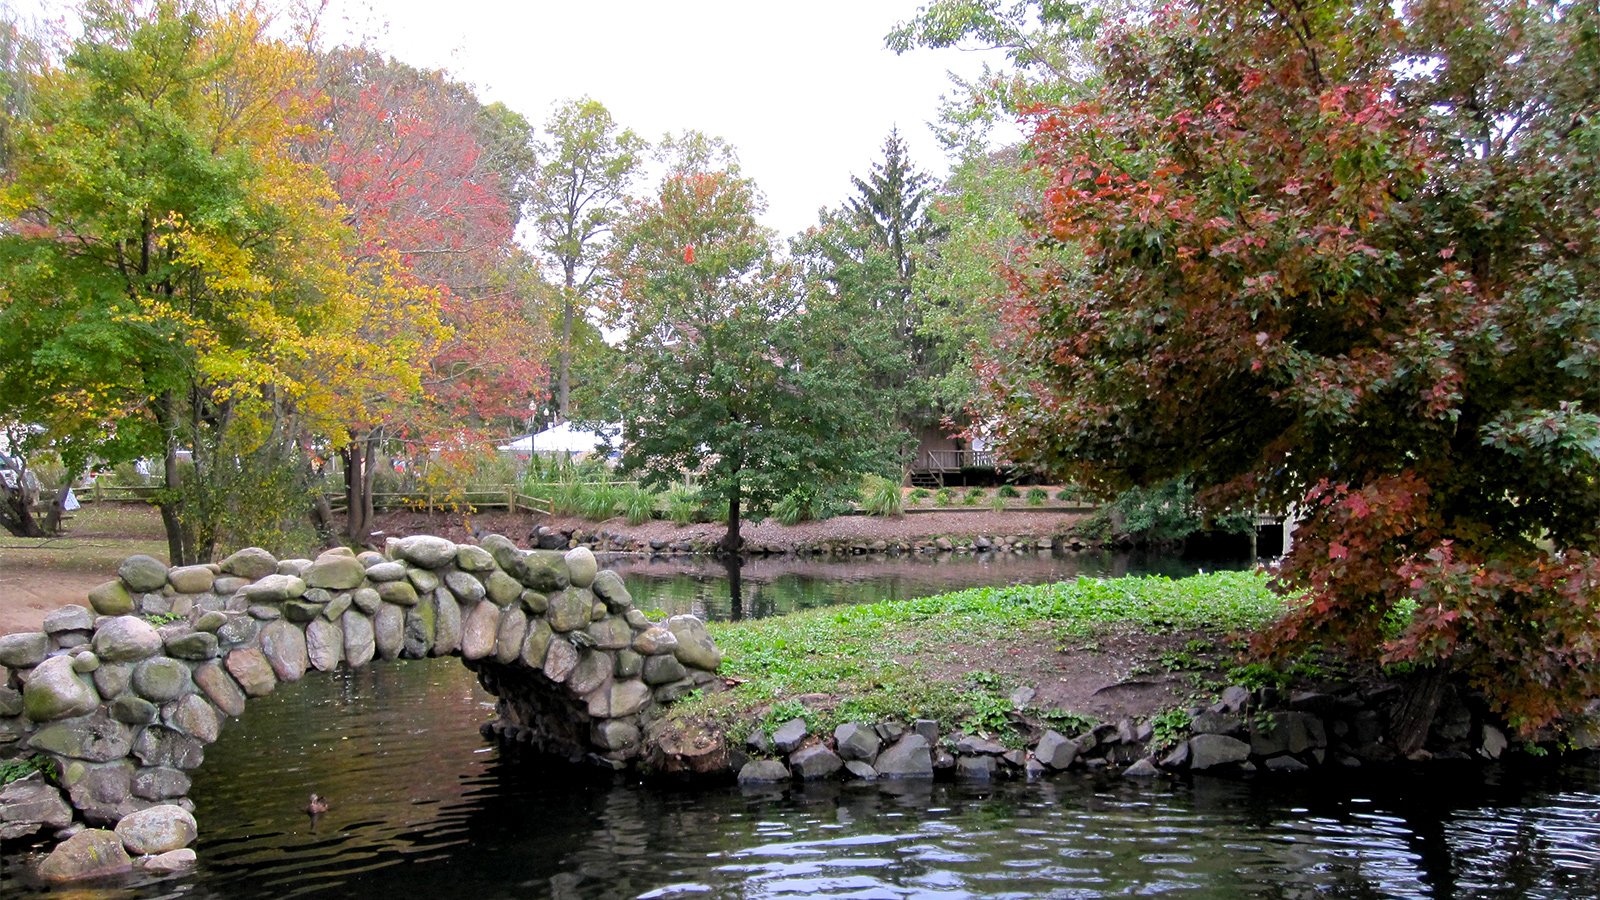 Arched stone bridge over a pond leading to green grass, set in front of colorful trees in Autumn